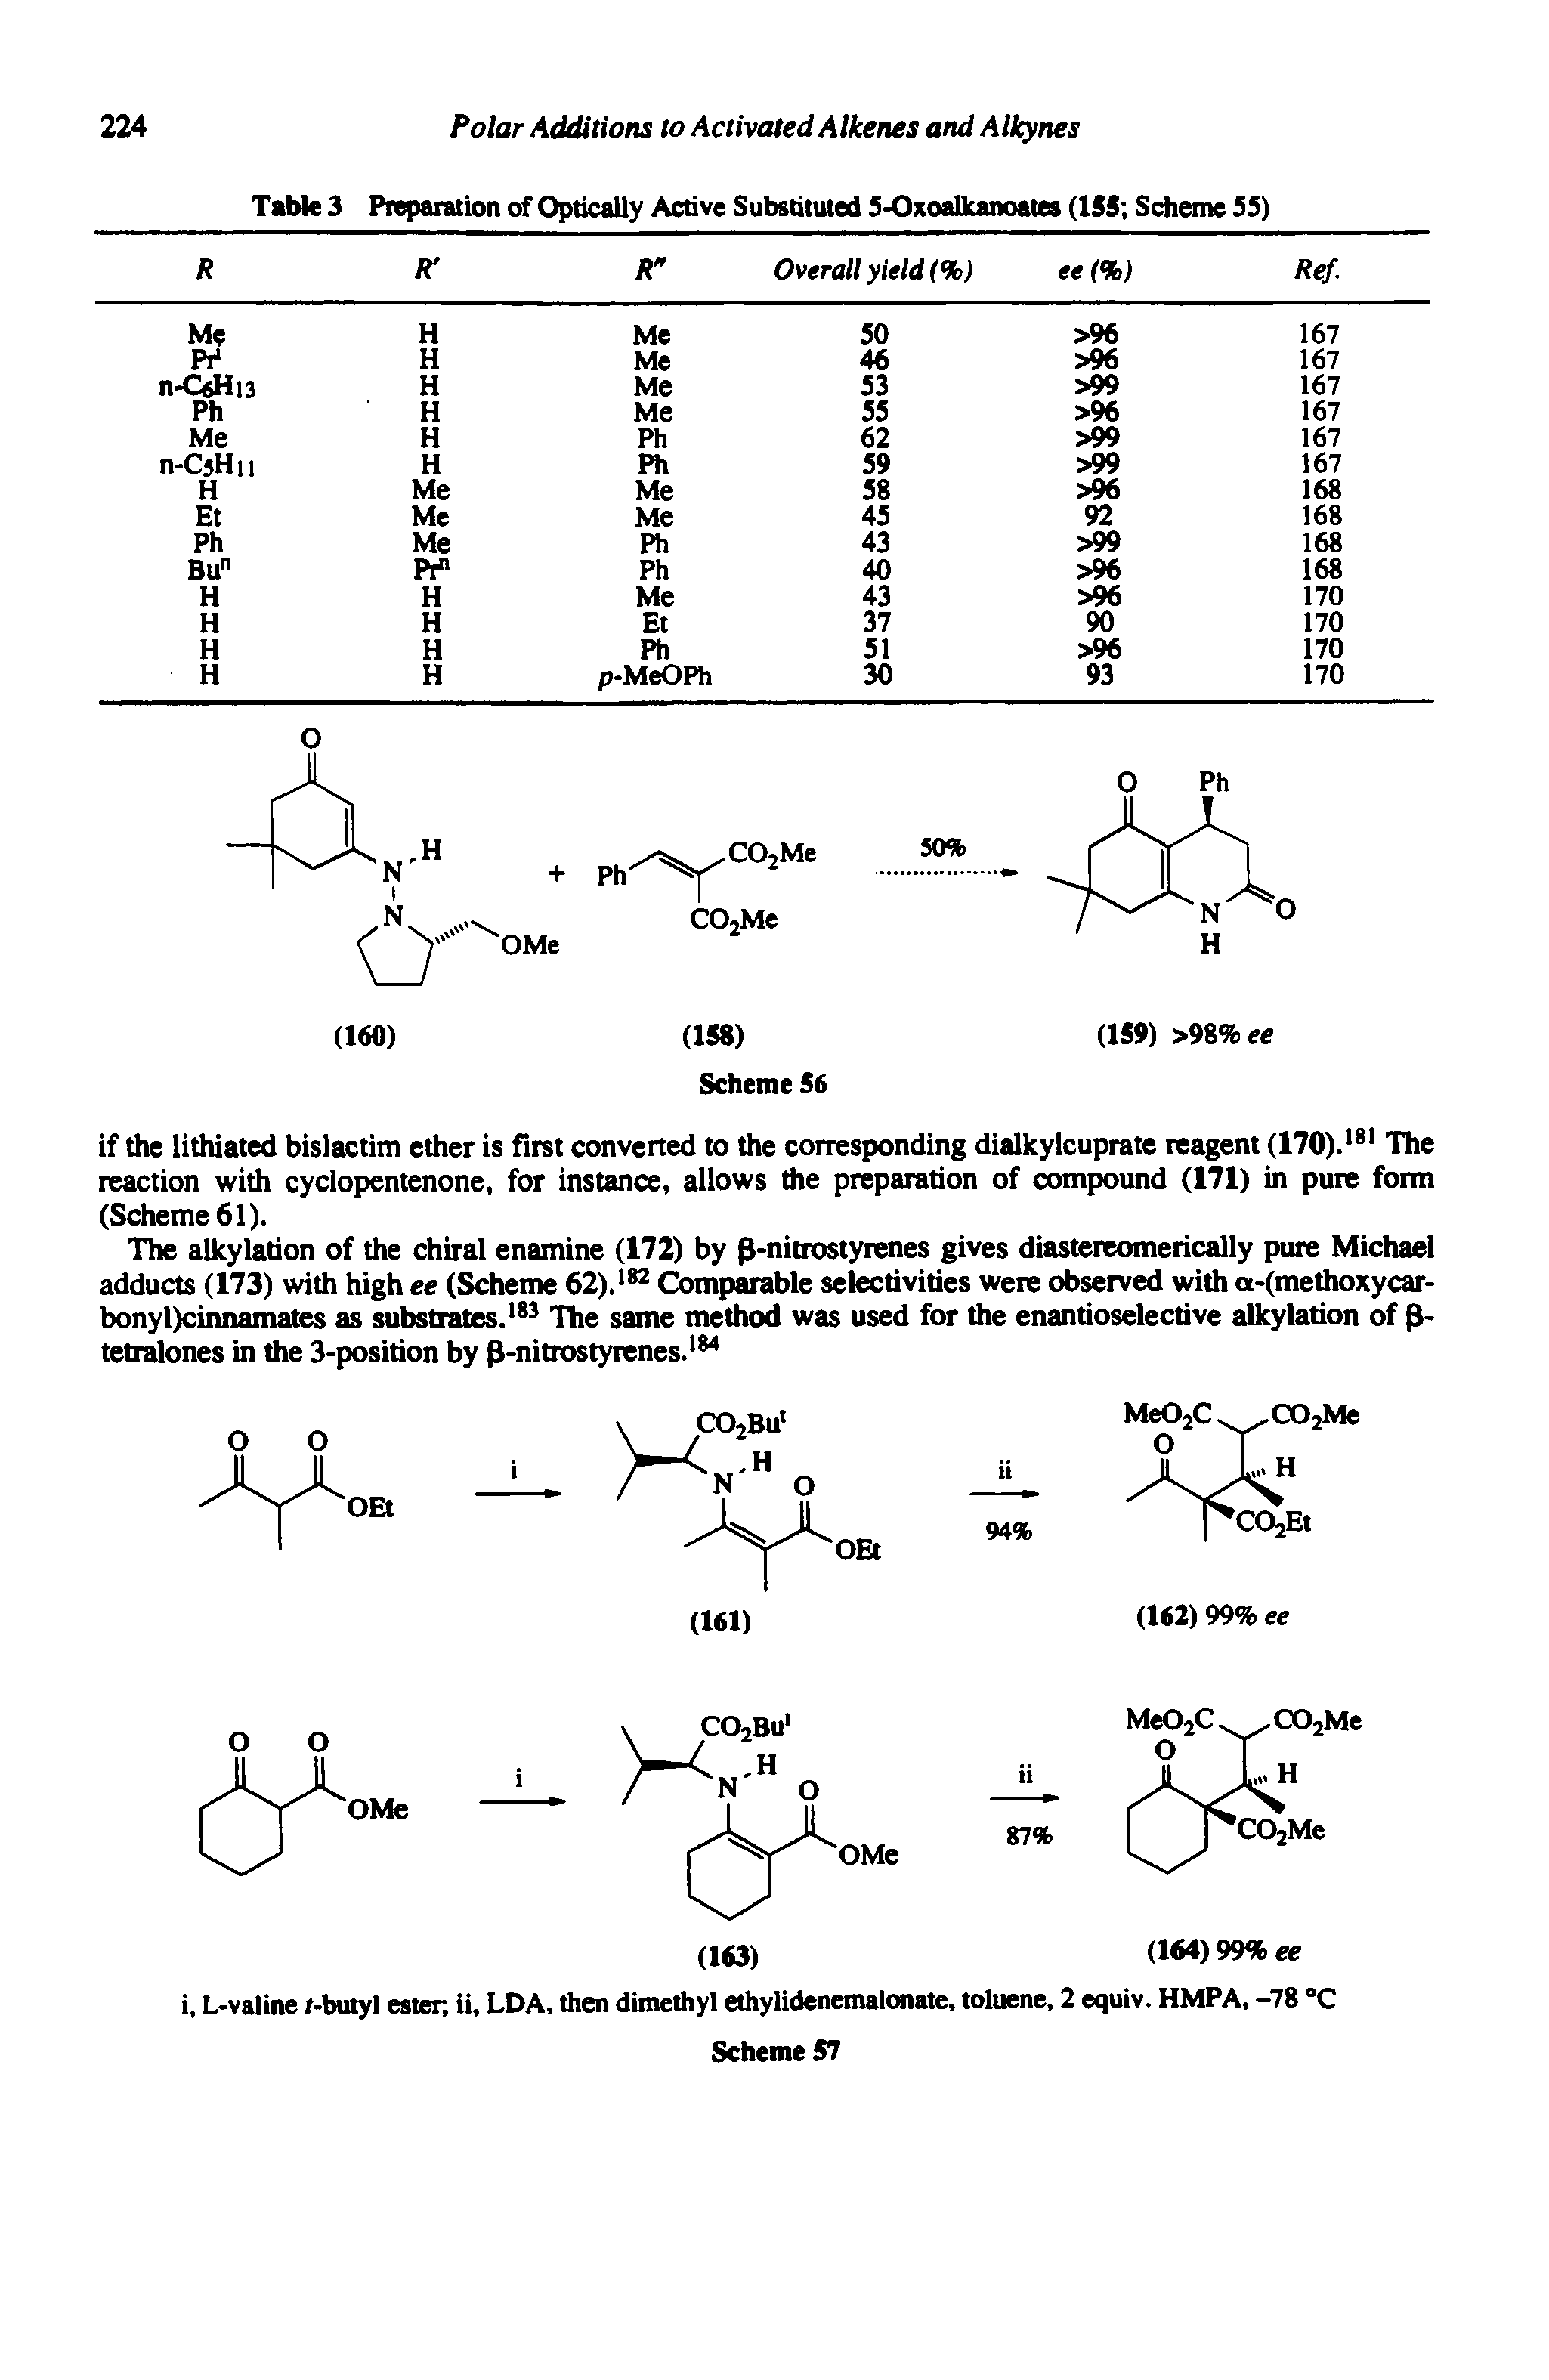 Table 3 Preparation of Optically Active Substituted 5-Oxoalkanoates (155 Scheme 55)...